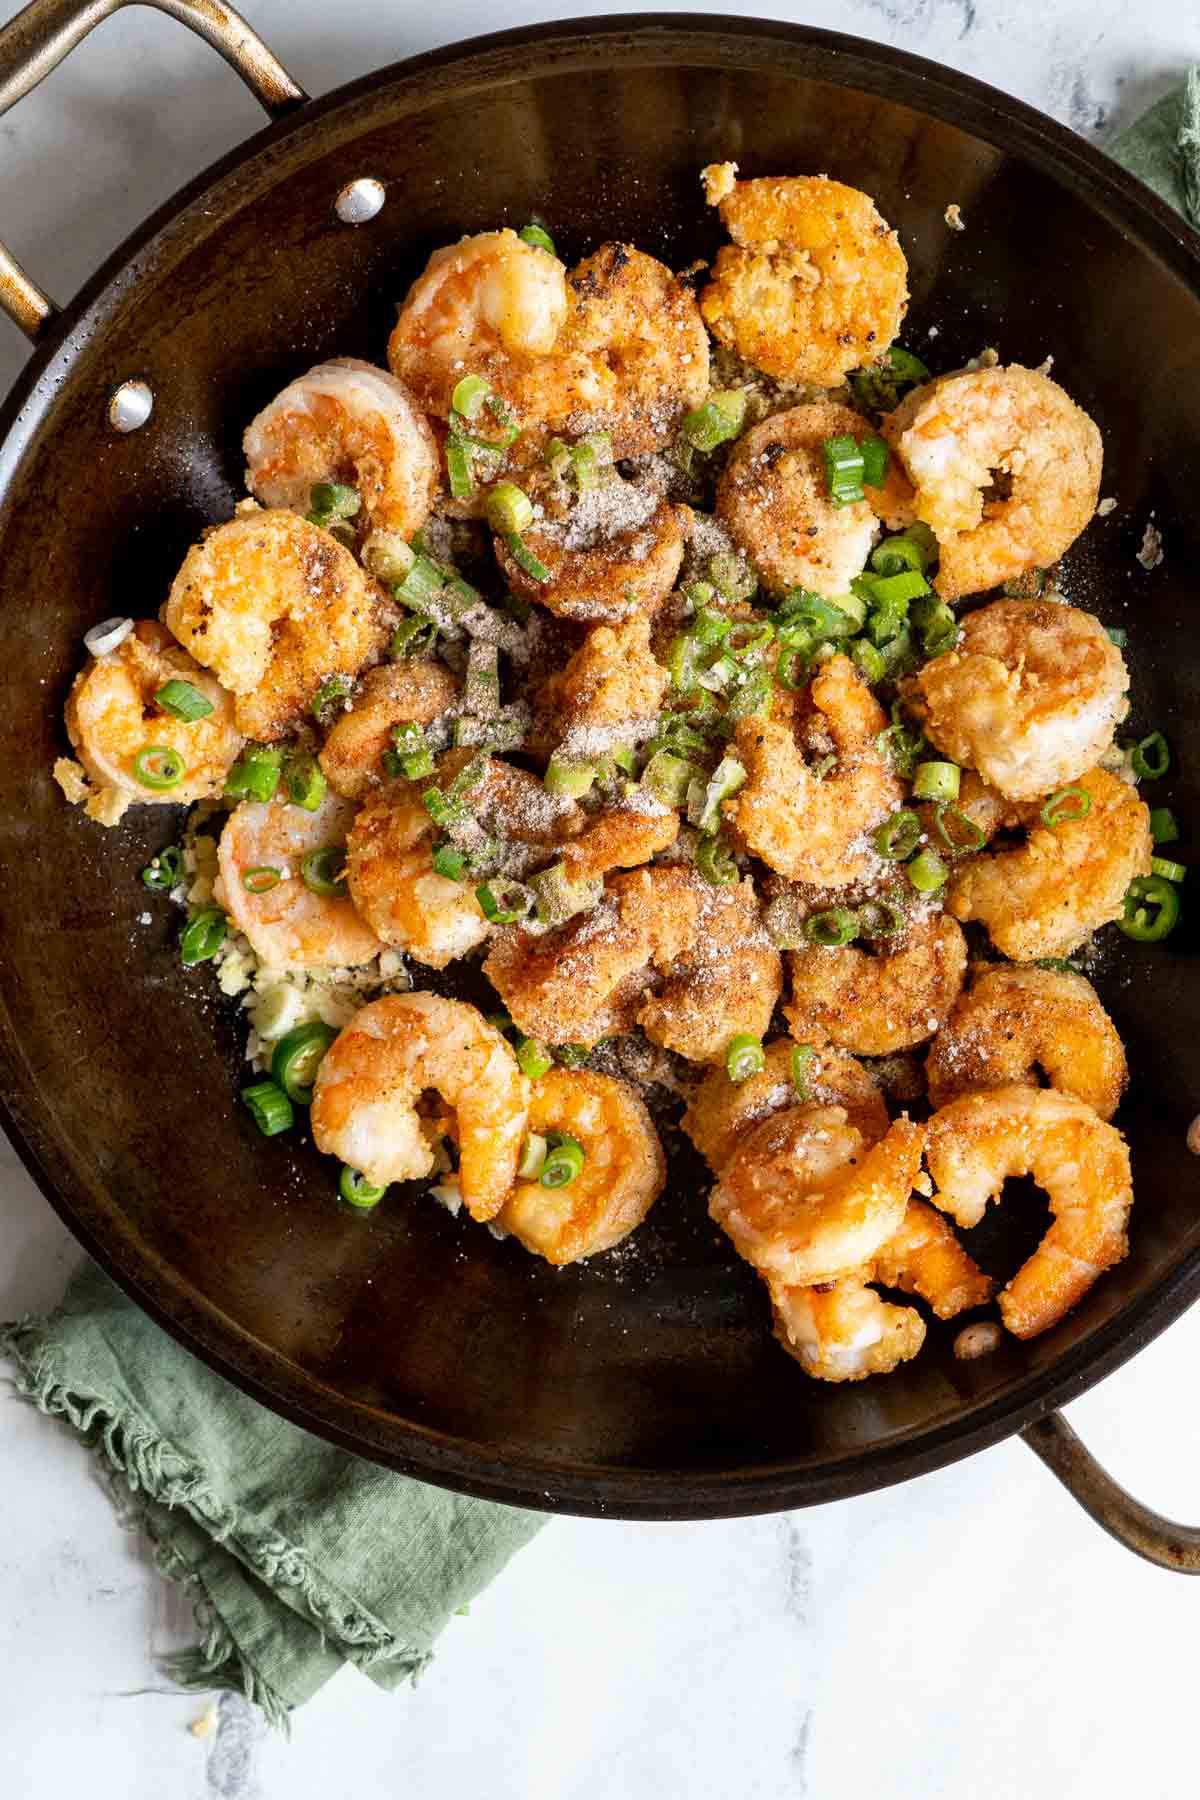 Adding the salt and pepper spice mixture to the fried shrimp in a pan.